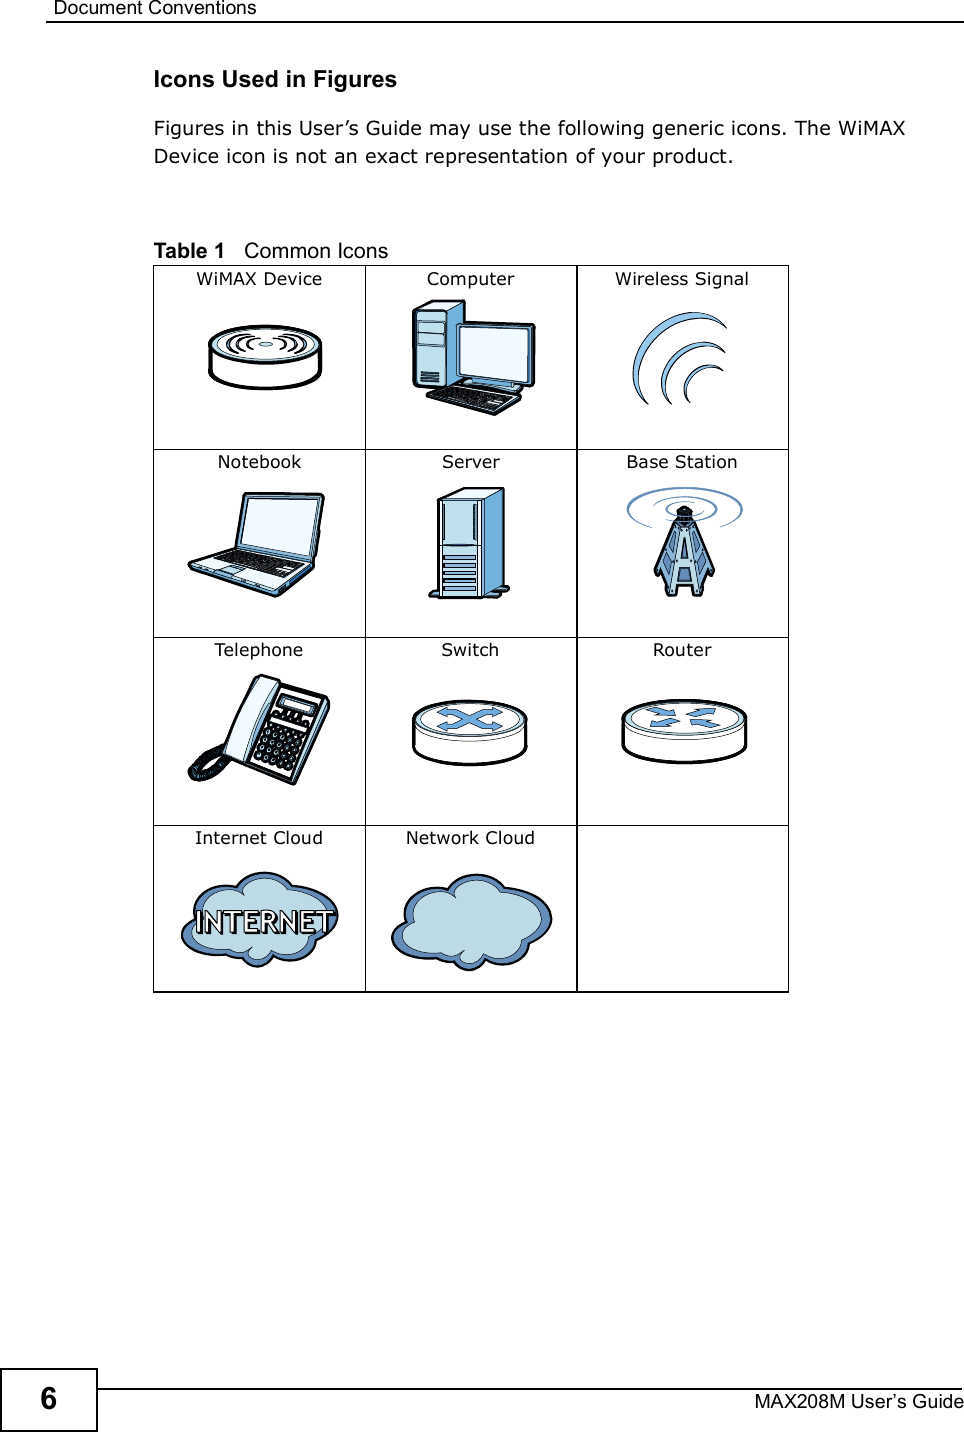 Document ConventionsMAX208M User s Guide6Icons Used in FiguresFigures in this User s Guide may use the following generic icons. The WiMAX Device icon is not an exact representation of your product.Table 1   Common IconsWiMAX Device ComputerWireless SignalNotebookServerBase StationTelephoneSwitchRouterInternet CloudNetwork Cloud